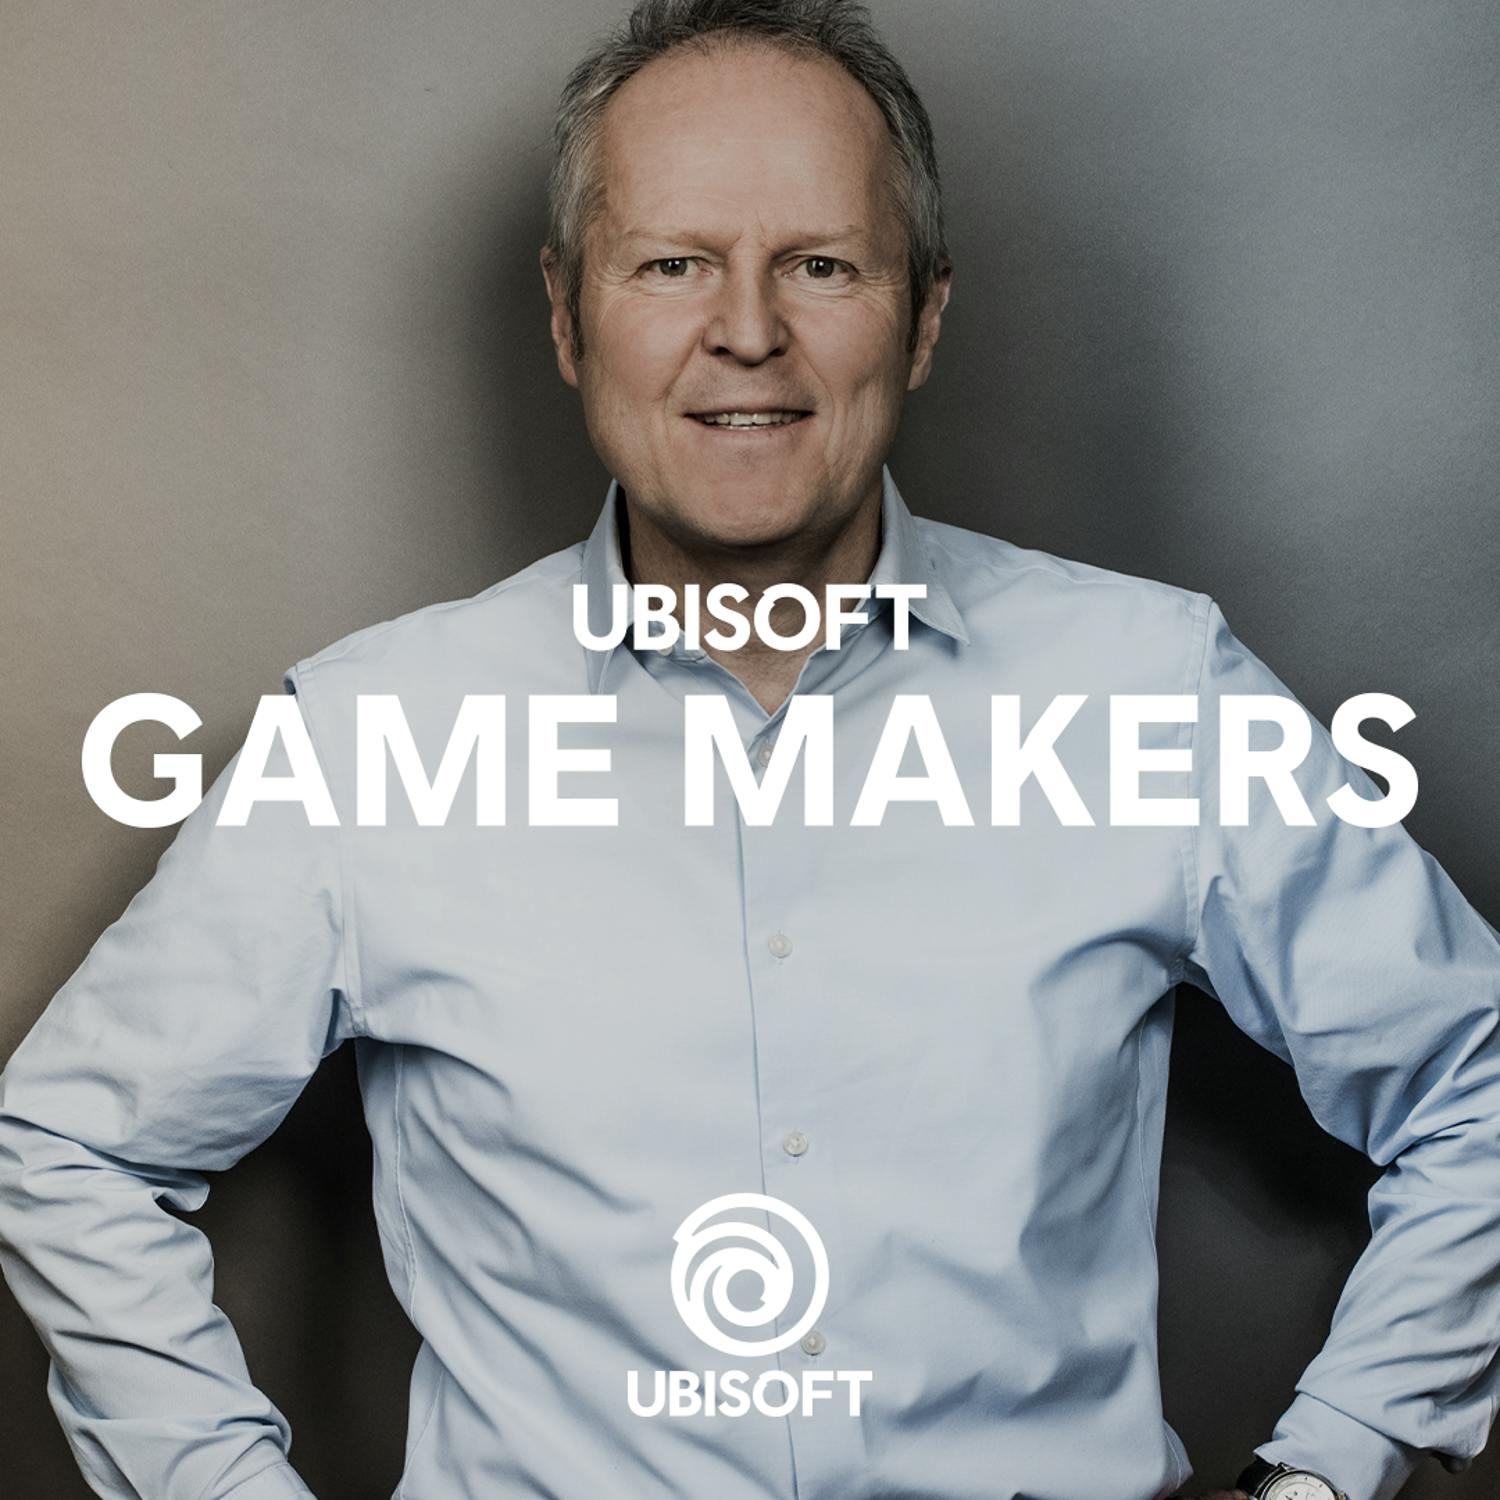 Ubisoft’s 35th Anniversary with CEO Yves Guillemot